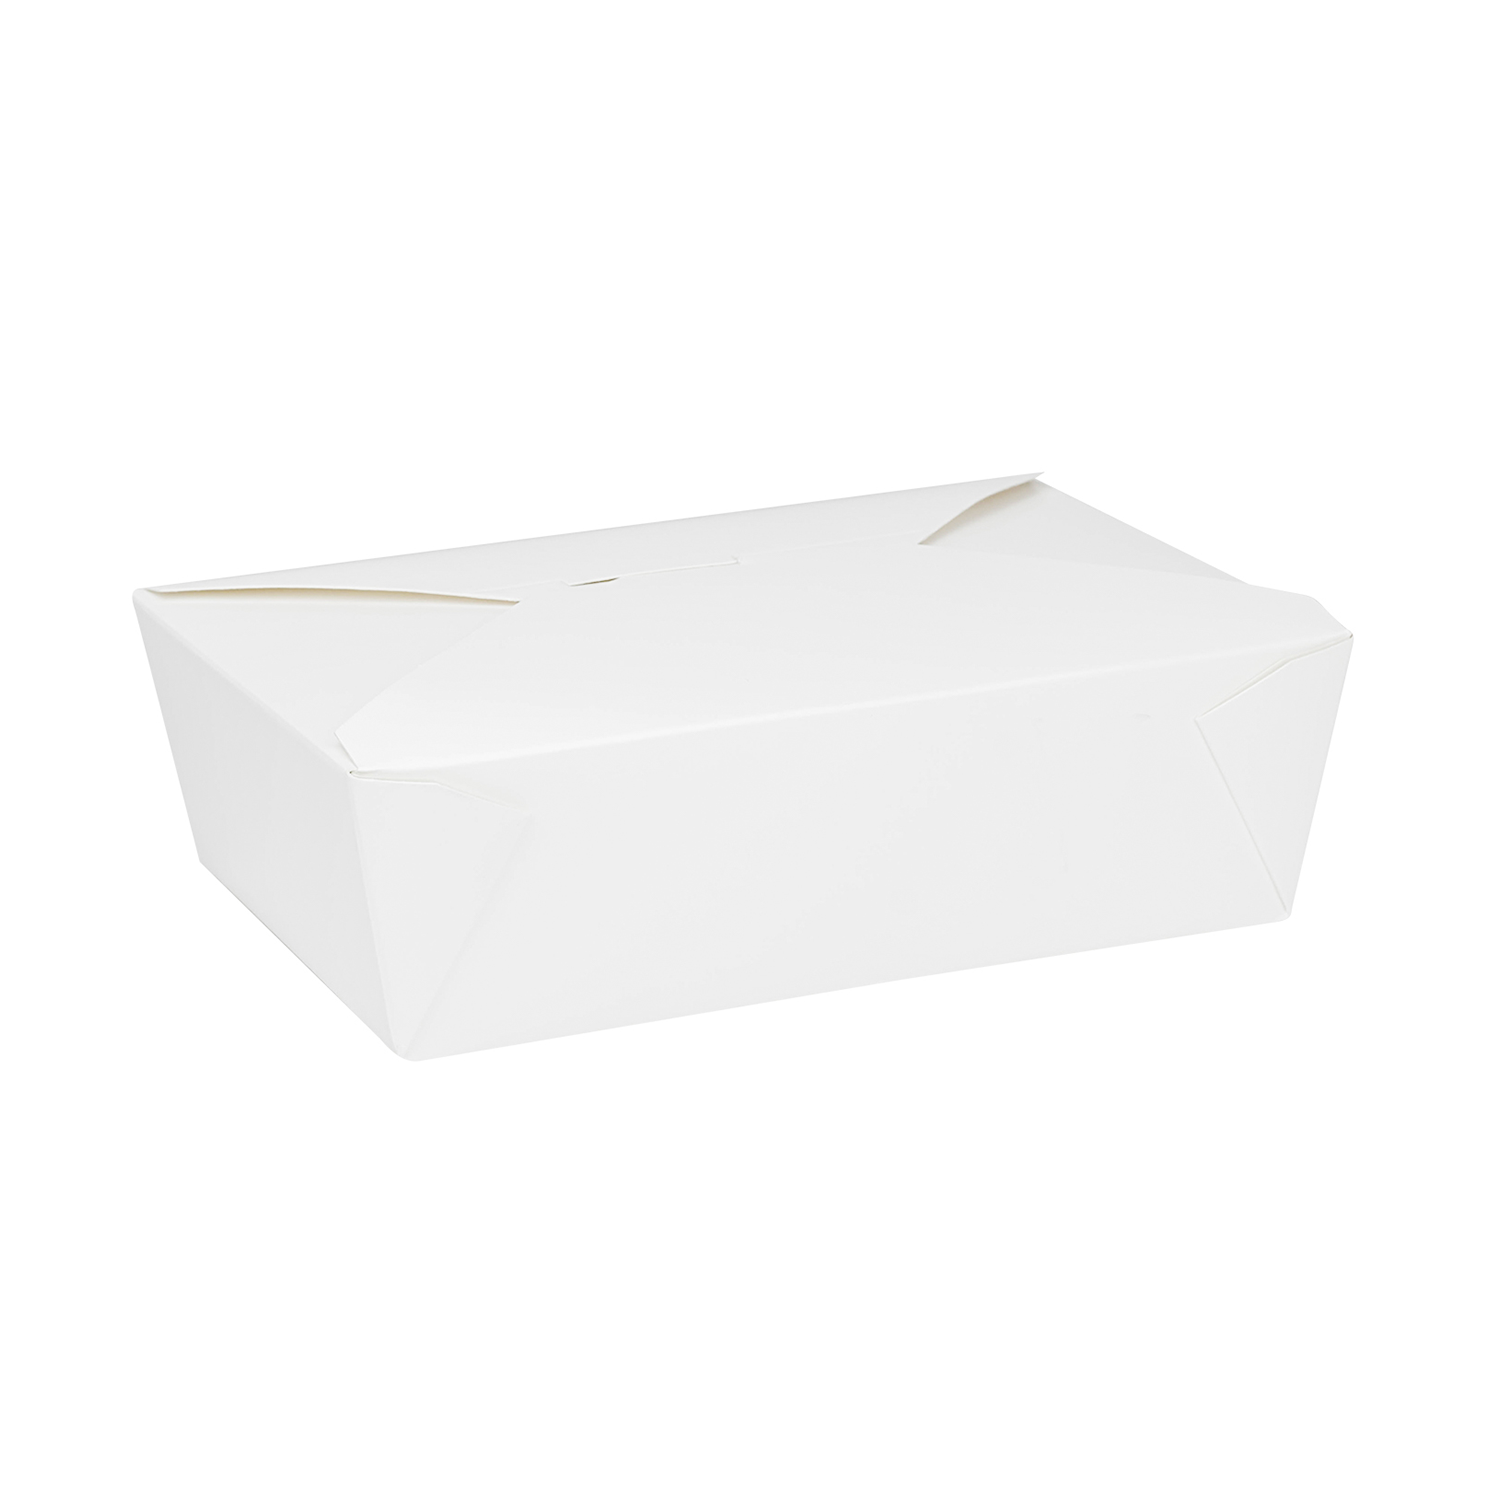 Kraft Microwavable Folded Paper #8 Takeout Containers - Karat Fold-To-Go  Box - 48oz - 5.9 X 4.6 X 2.4 - 300 Count, Coffee Shop Supplies, Carry  Out Containers